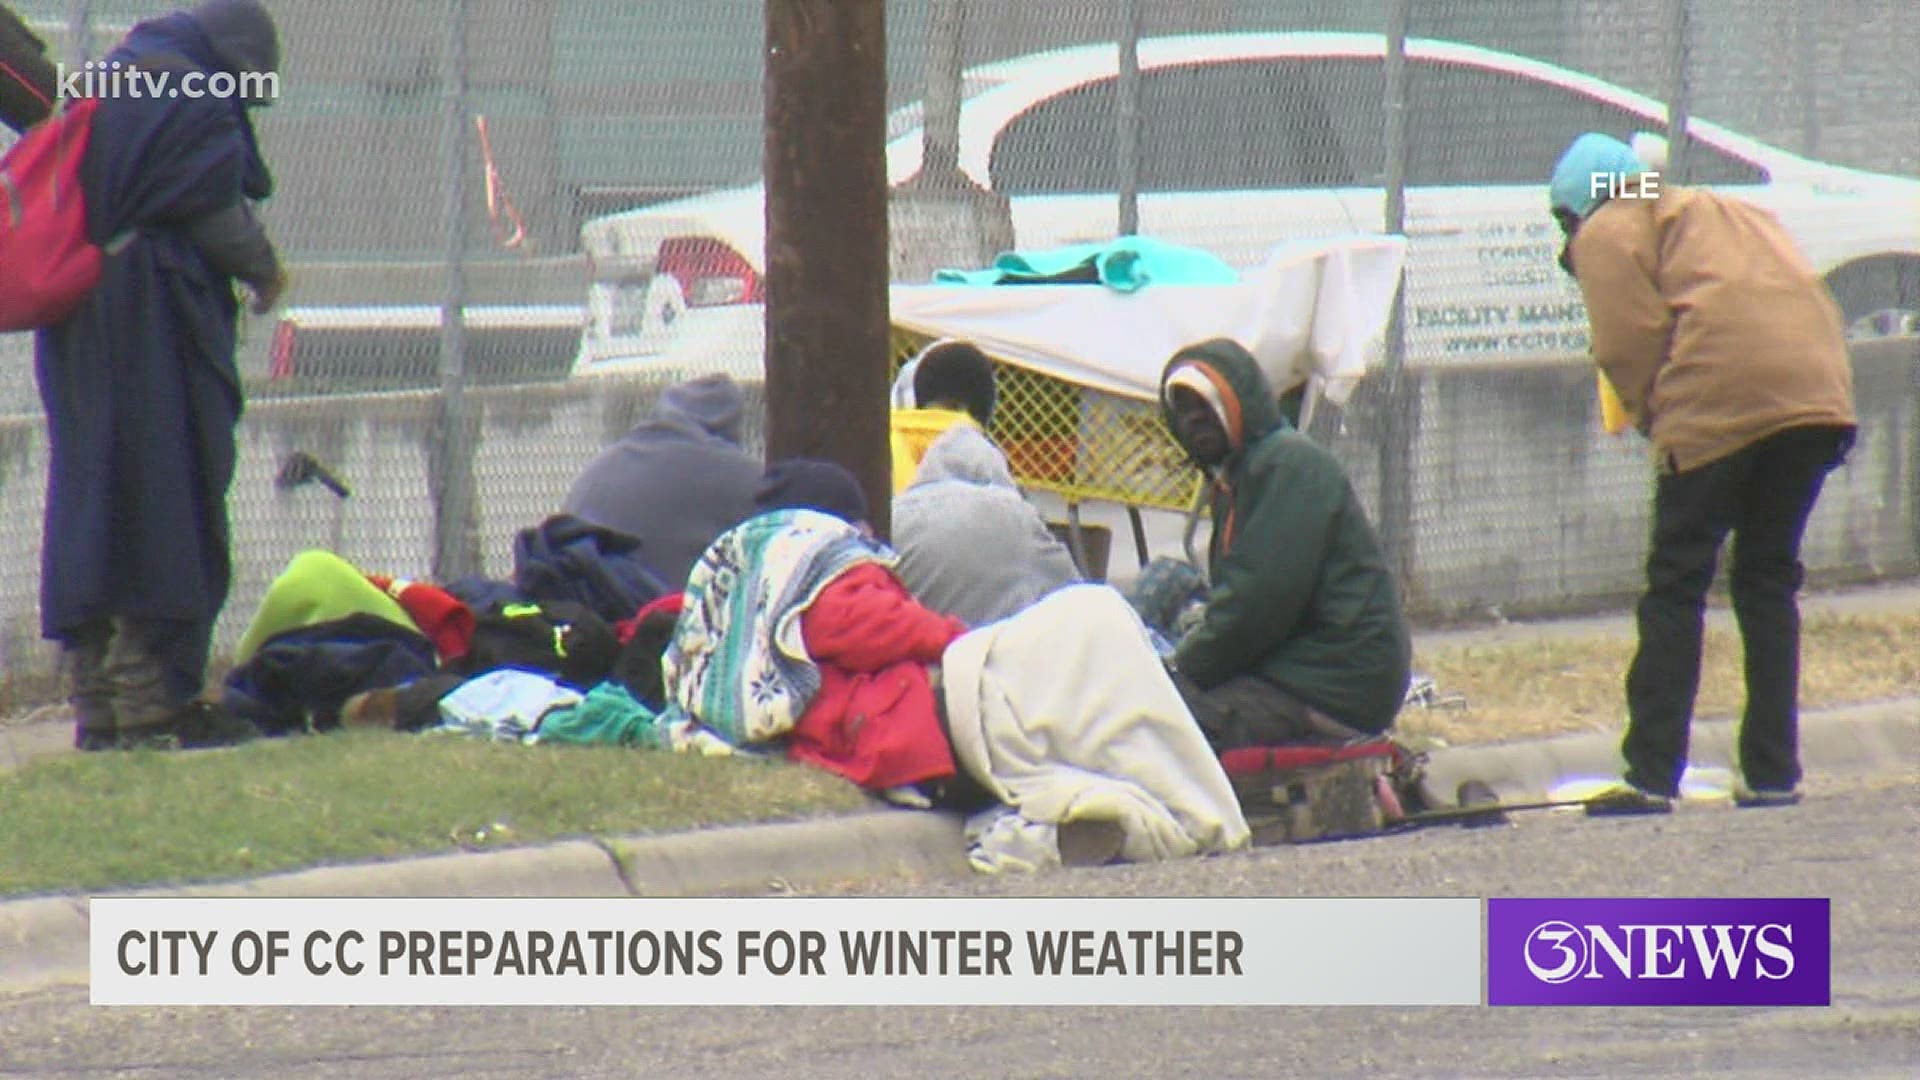 The City said they are teaming up with the Salvation Army and opening many homeless shelters, while still following CDC guidelines and enforcing social distancing.